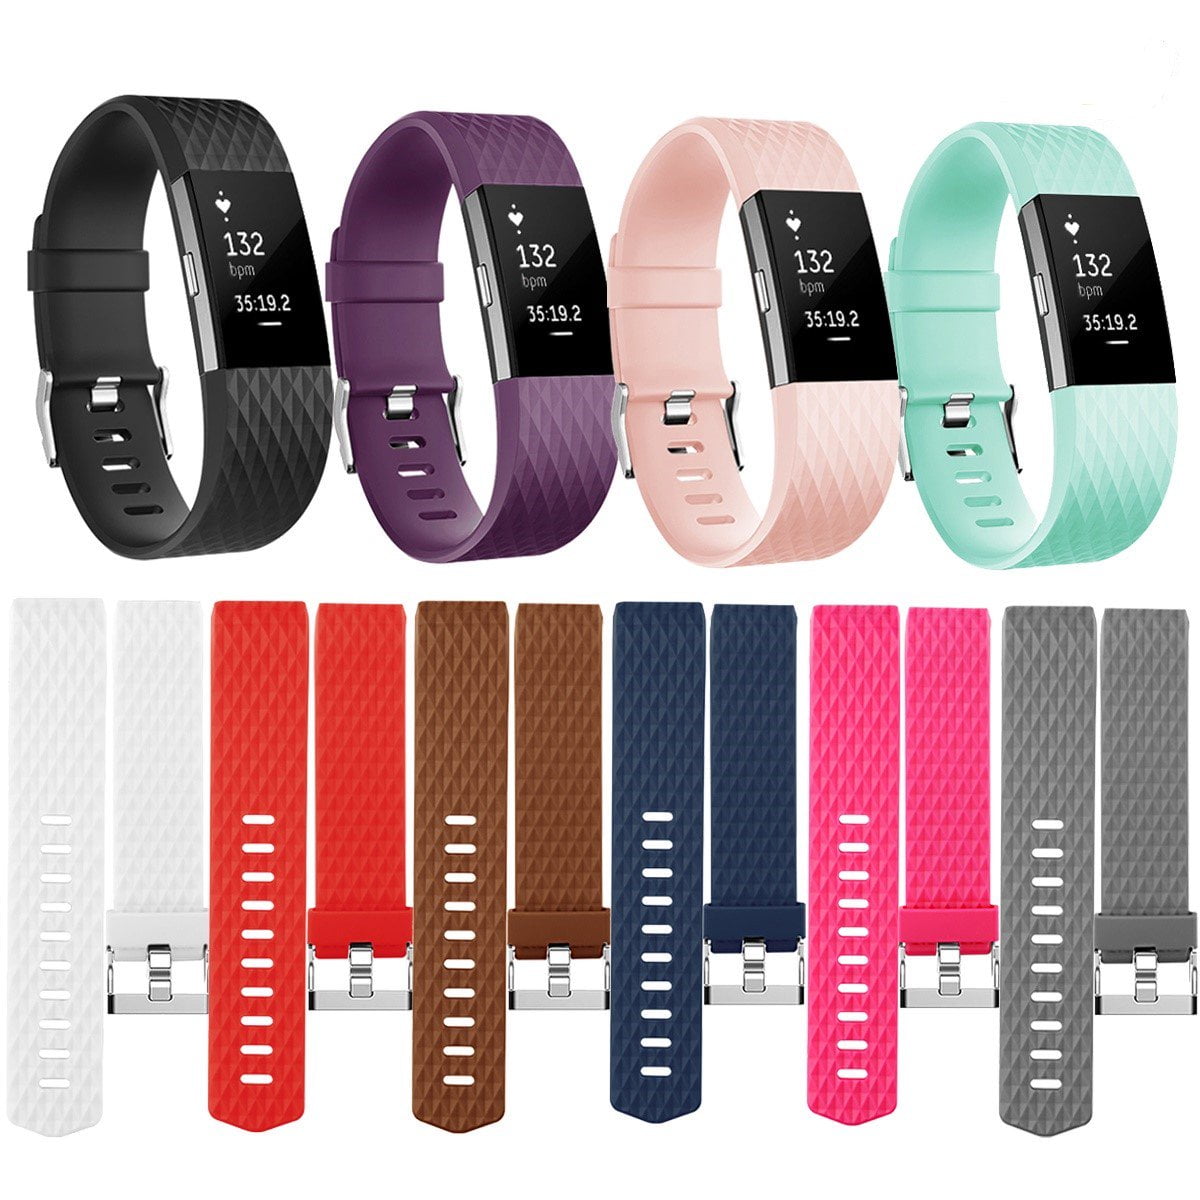 Classic Special Edition Replacement bands Black Small POY Fitbit Charge 2 Bands 